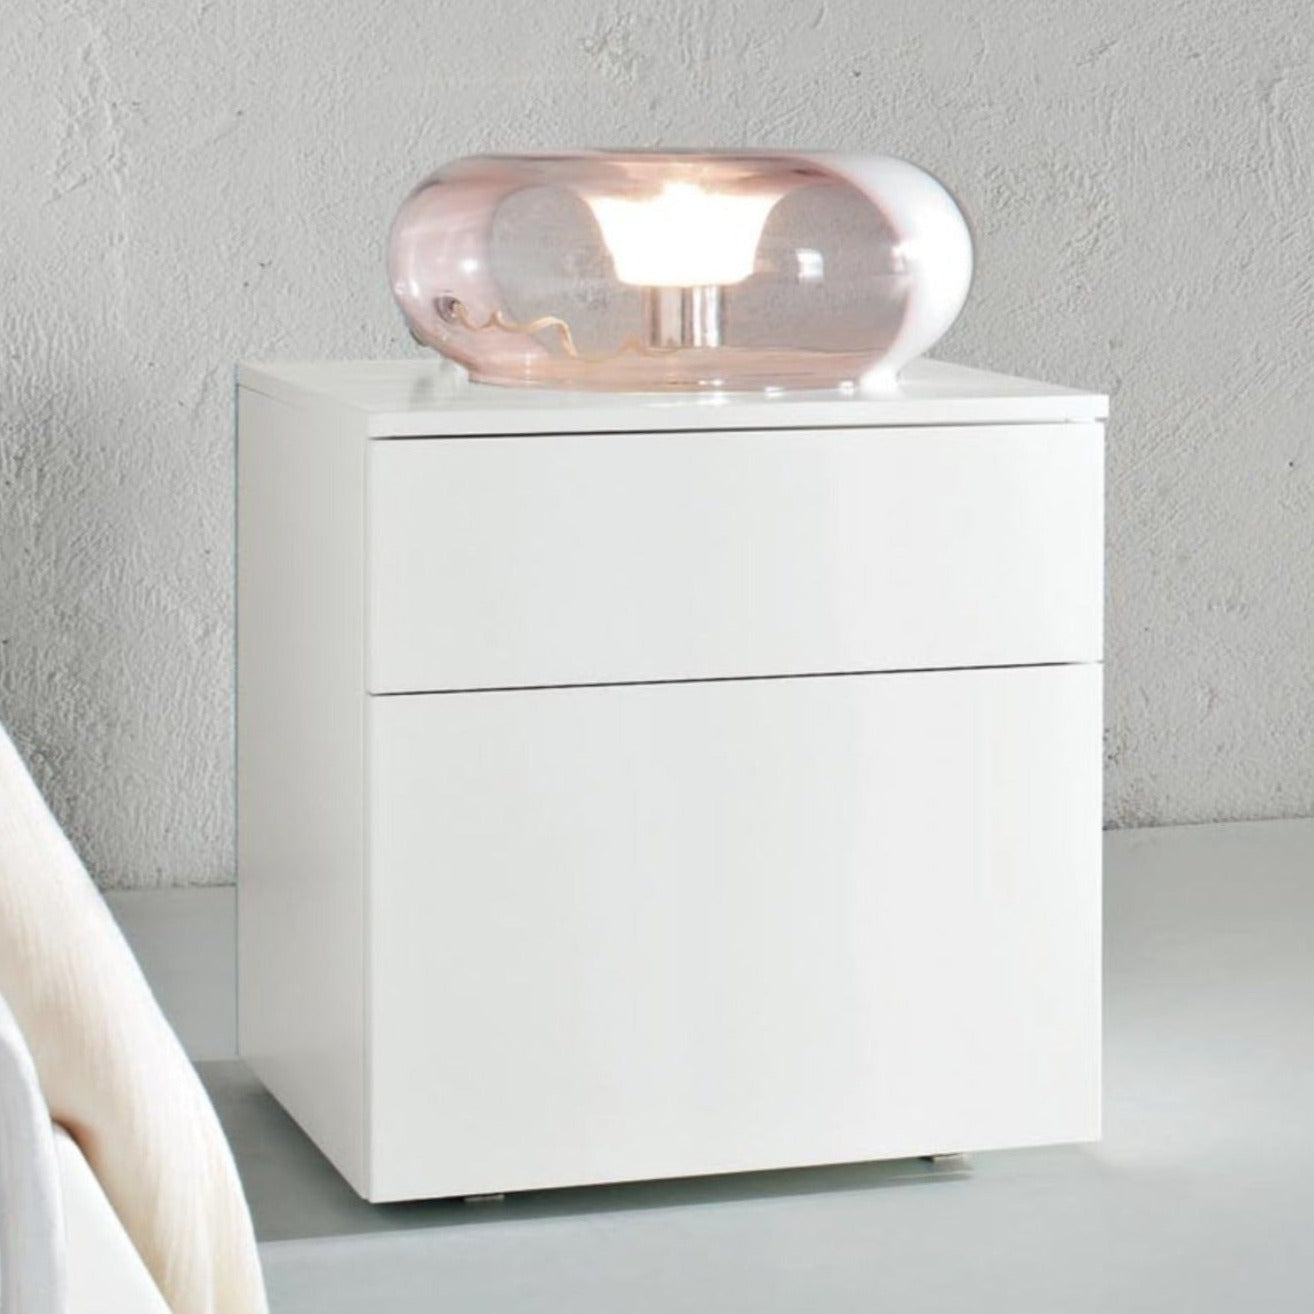 Slim 2 drawer bedside cabinet by Dall'Agnese